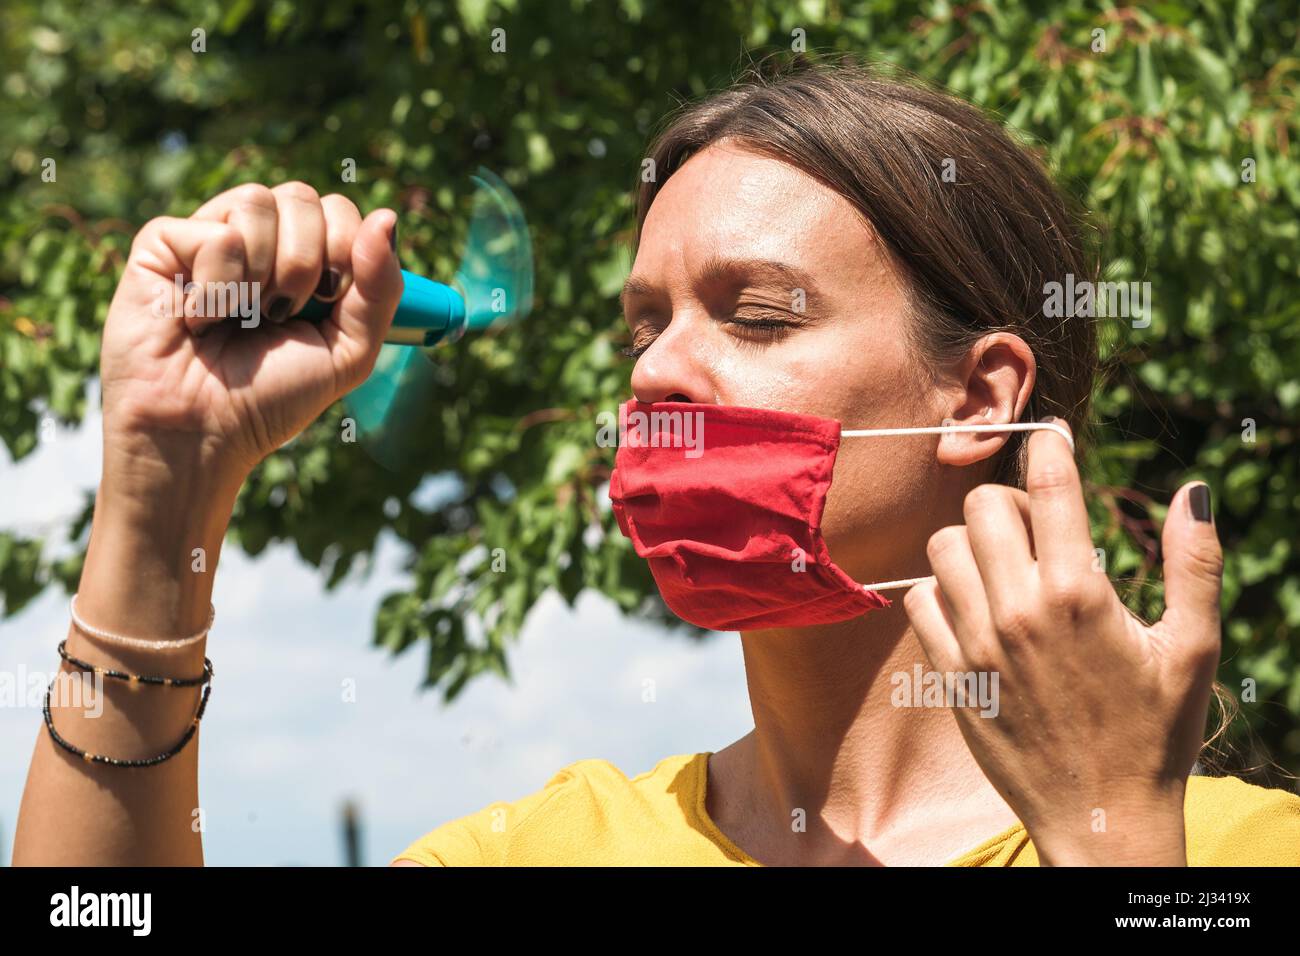 young woman cooling down with hand held ventilator while wearing a protective face mask Stock Photo